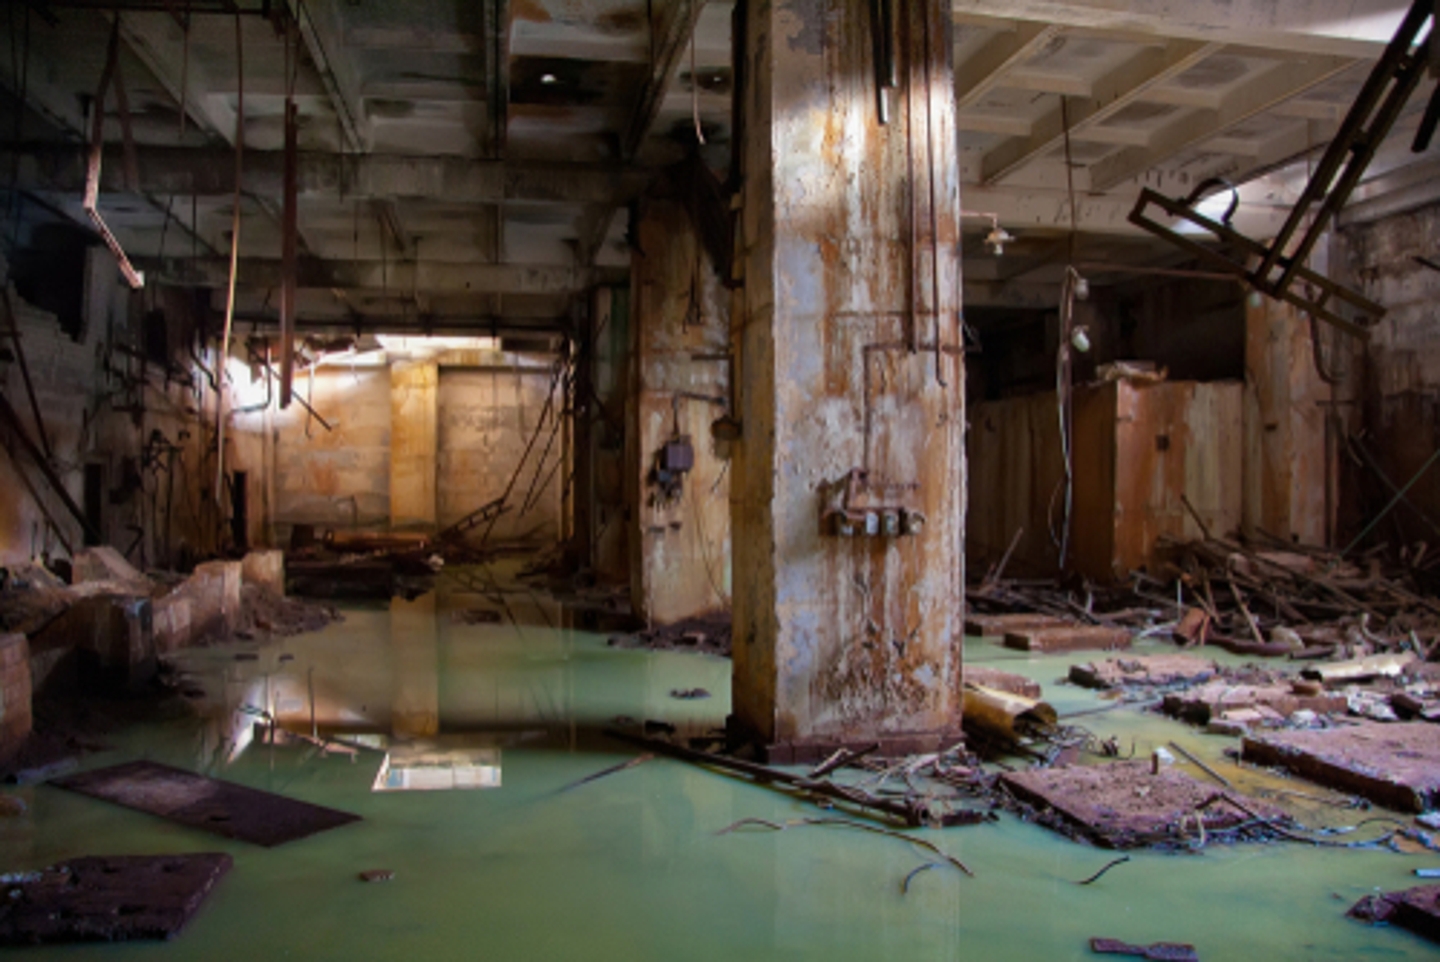 When you need emergency water extraction for basement flooding, call SERVPRO®. The #1 choice in fire and water cleanup and restoration is always available with 24-hour emergency service.